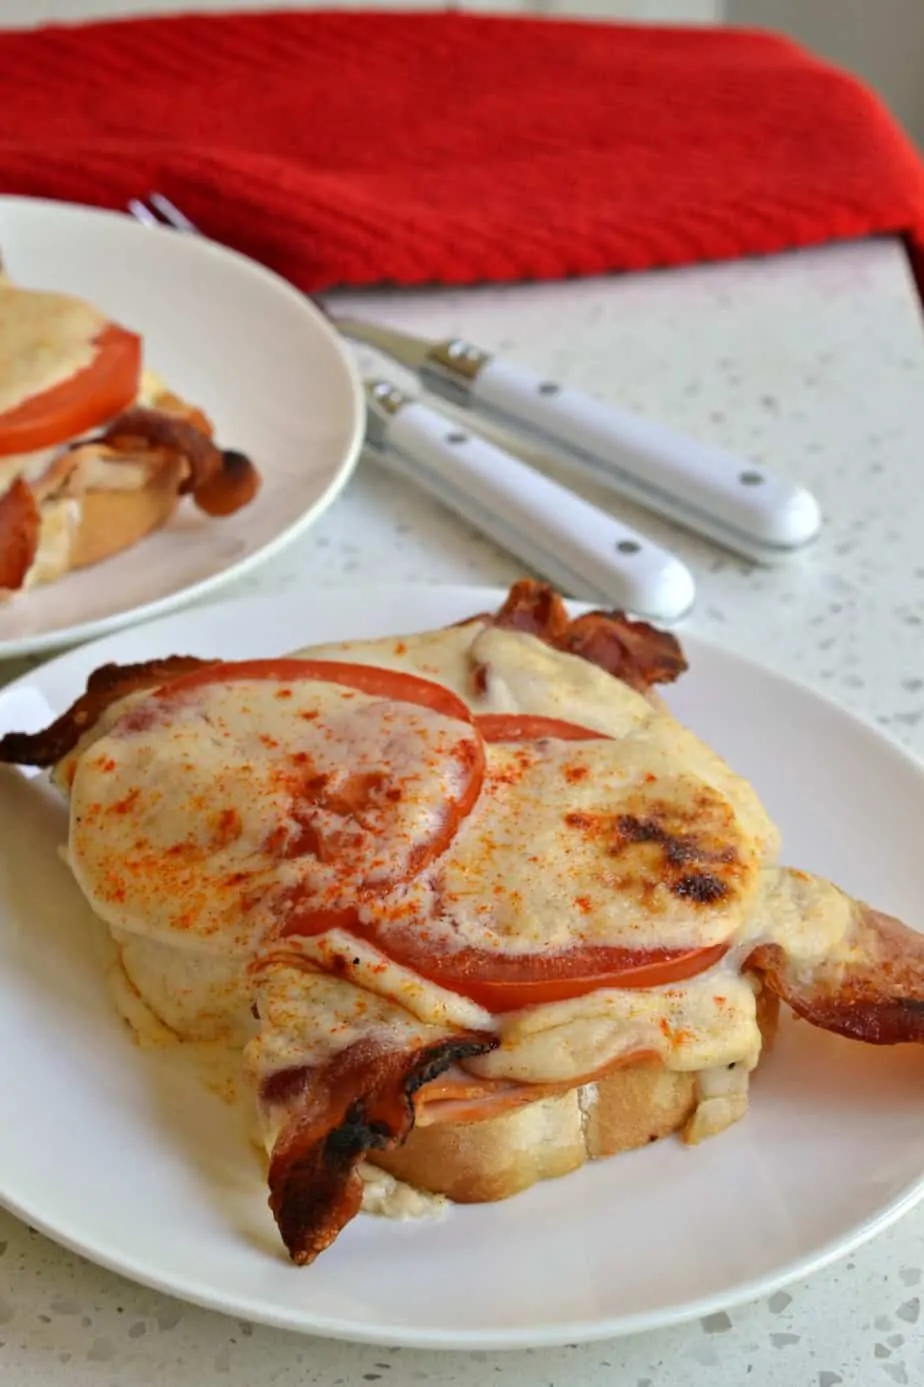 This delectable Hot Brown Sandwich is layered with roasted turkey, bacon, and creamy cheese sauce.